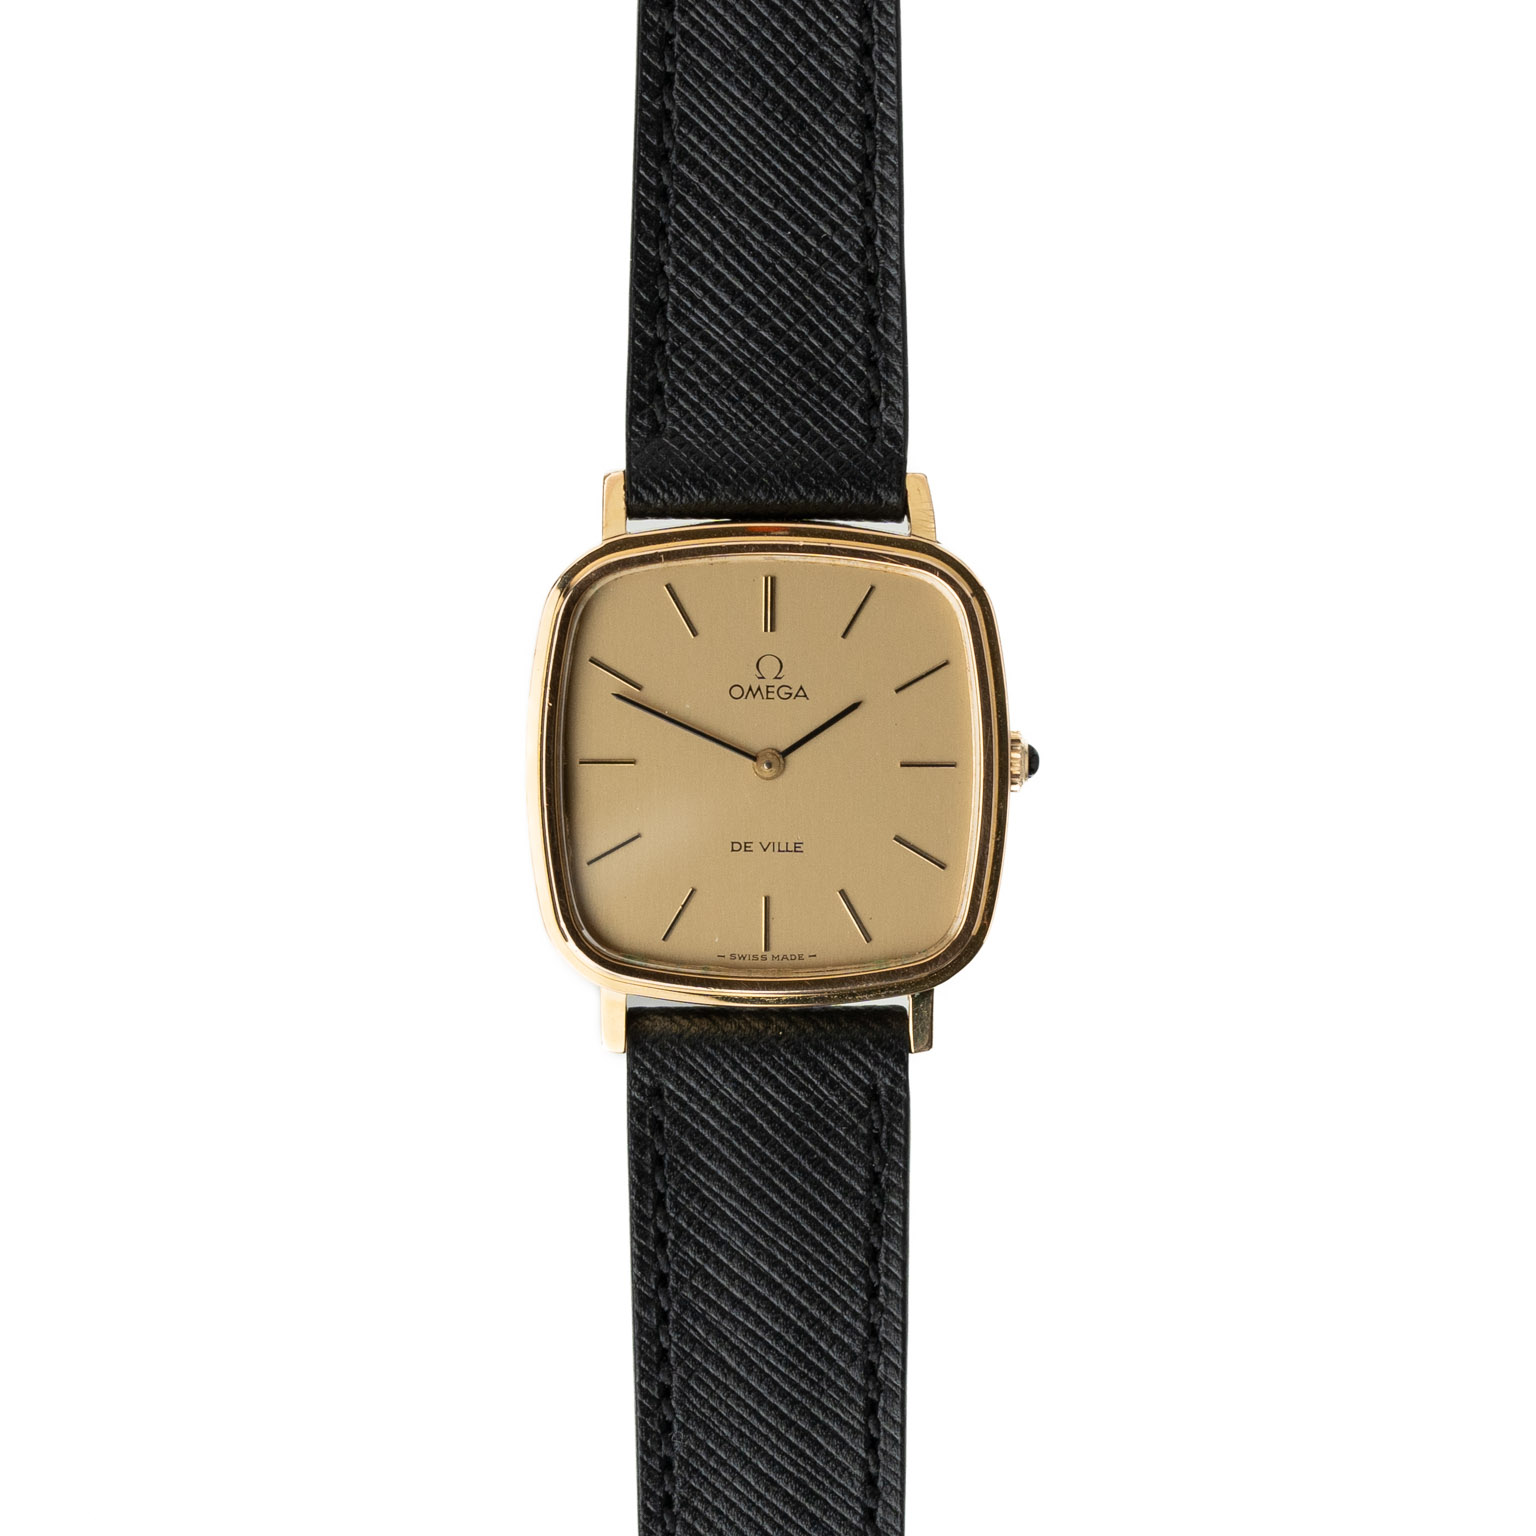 Vintage Omega De Ville gold plated square watch from 1970s front